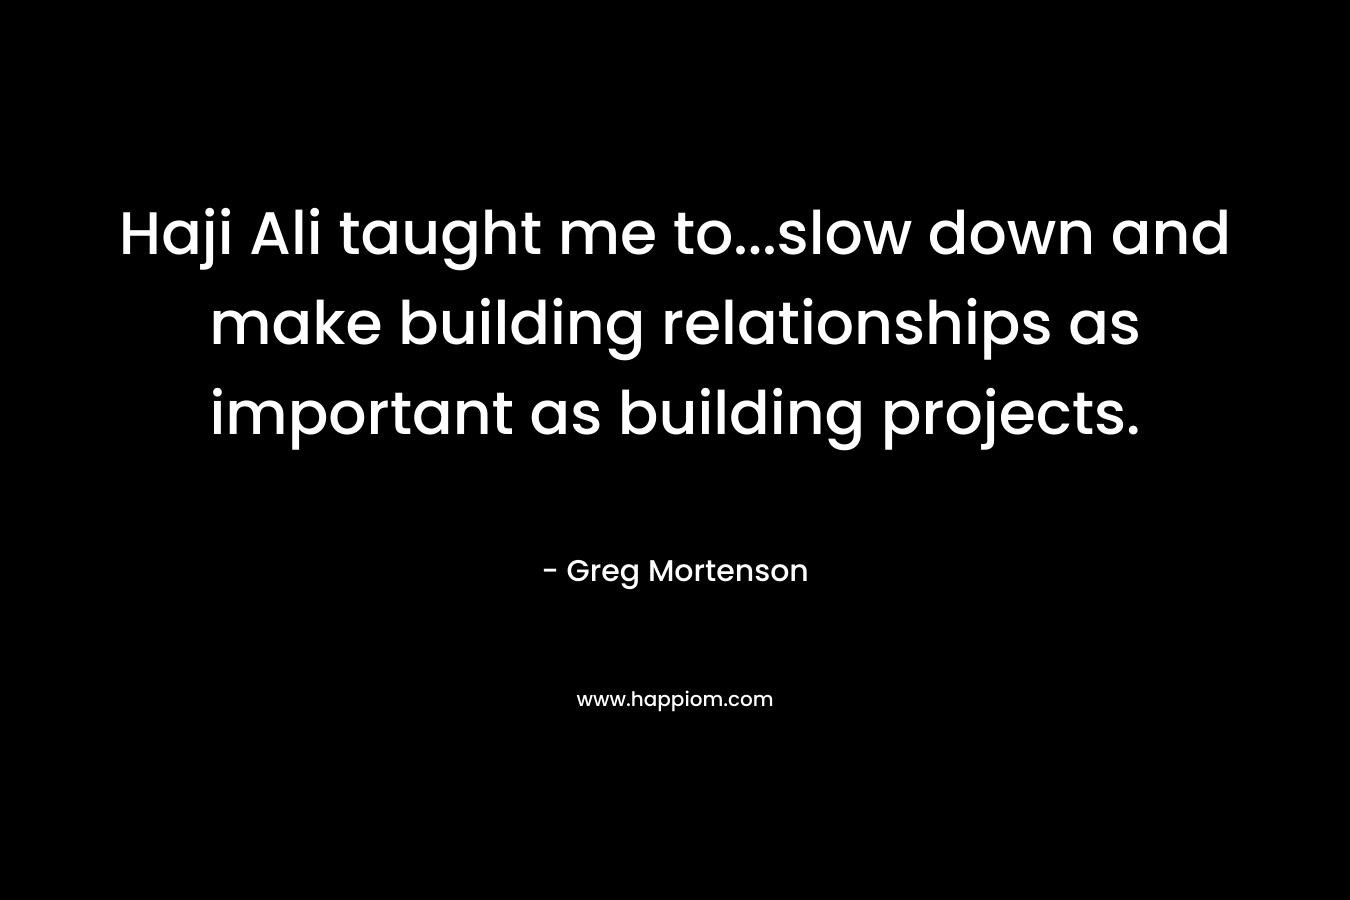 Haji Ali taught me to...slow down and make building relationships as important as building projects.